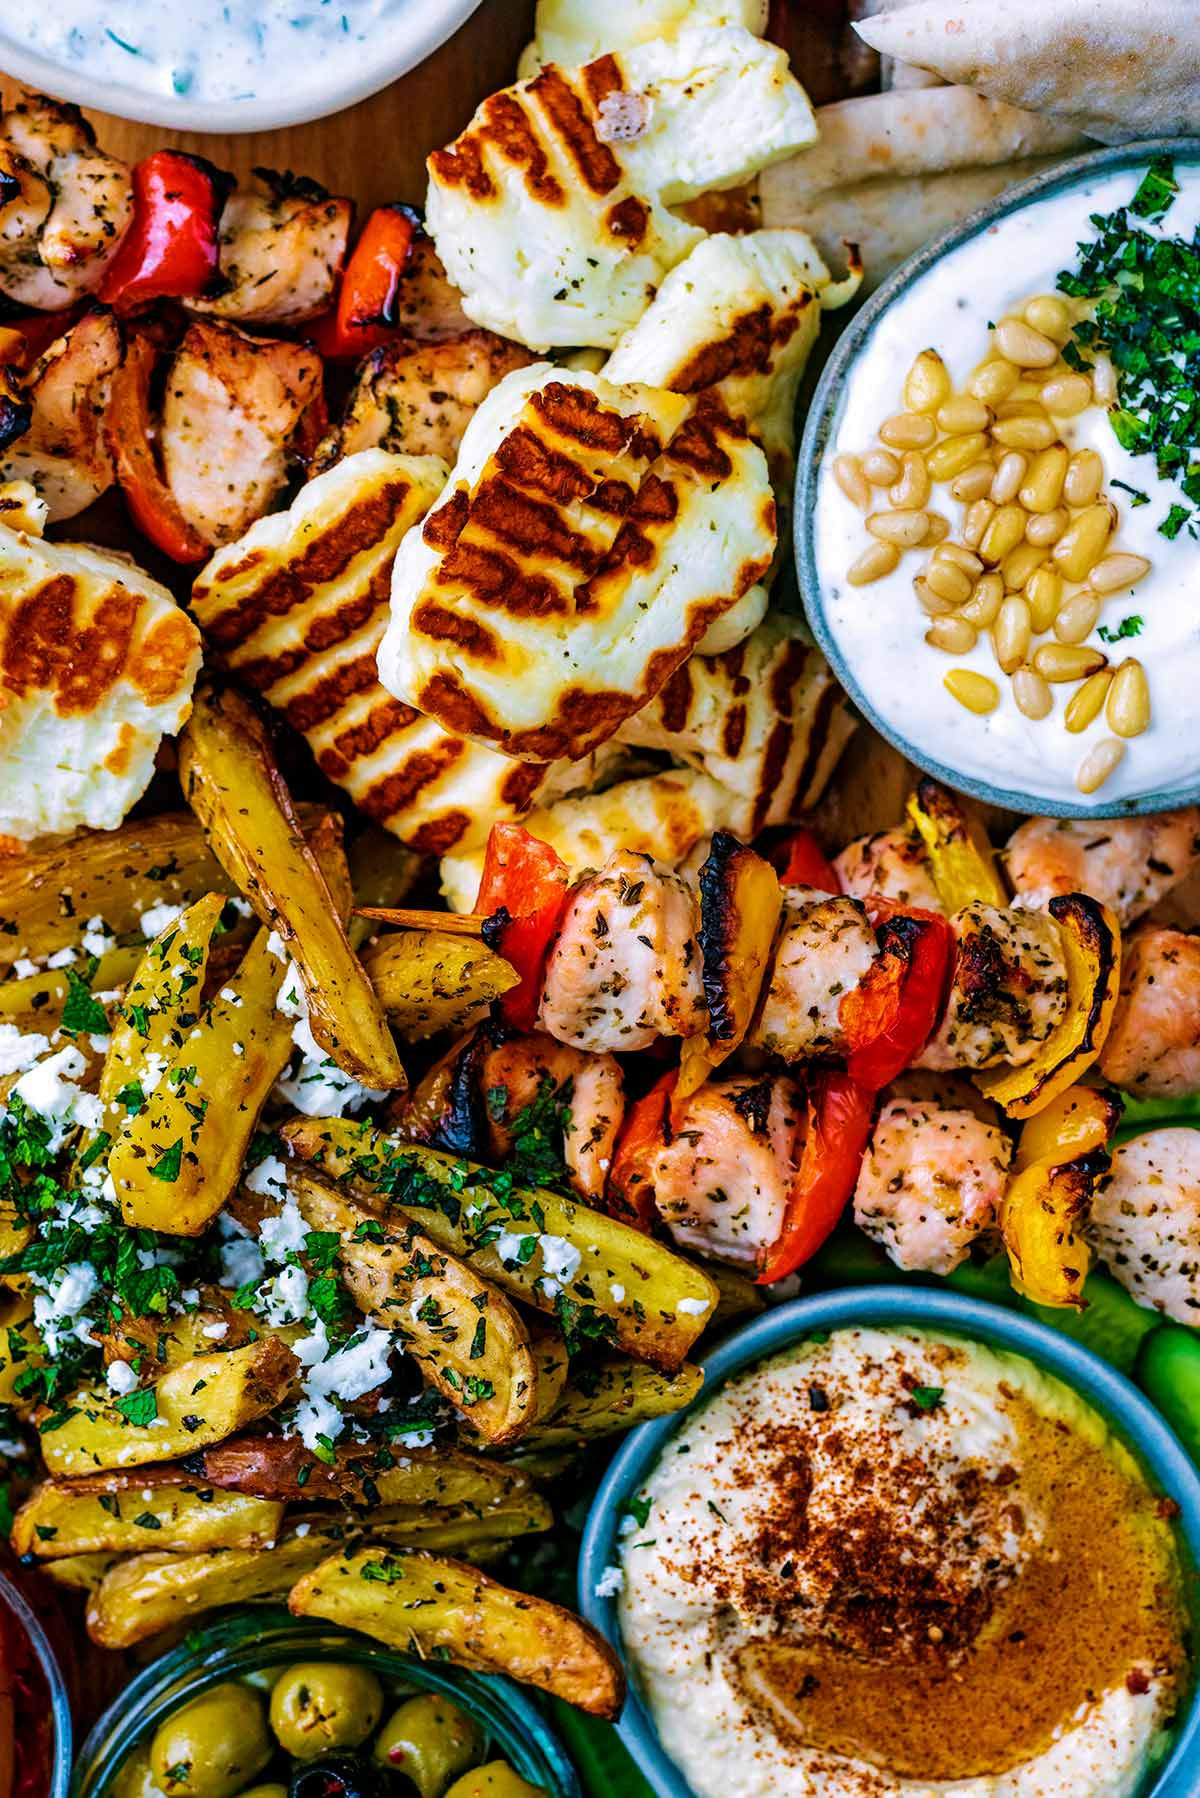 Sliced grilled halloumi, potato wedges, dips and chicken skewers arranged together on a board.